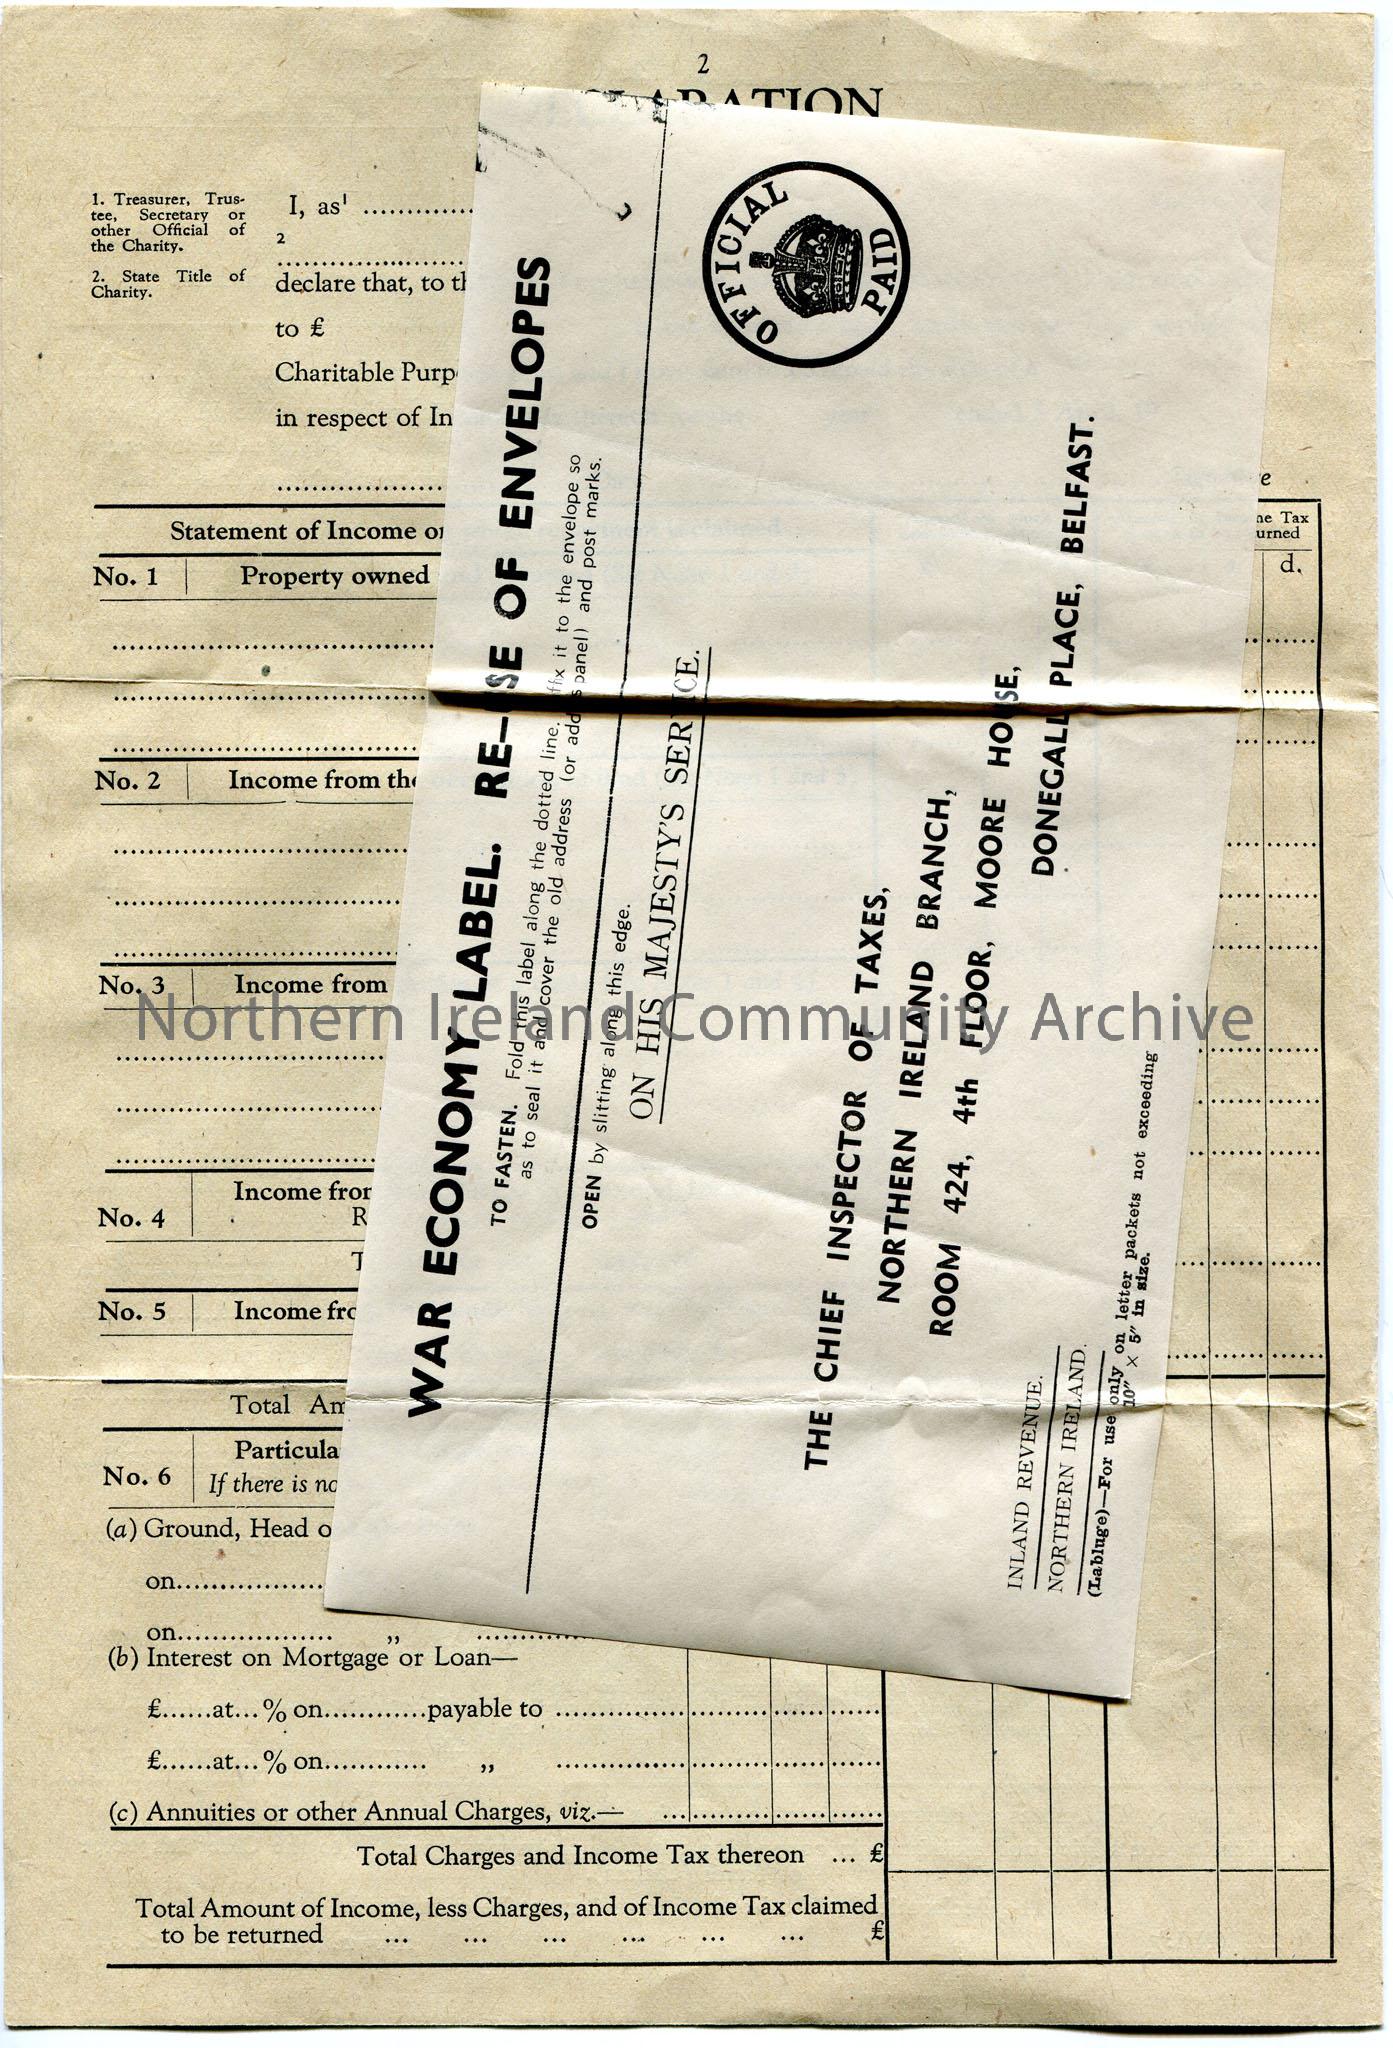 Income Tax Repayment Claim form. In booklet form. ‘Rice Bequest, Coleraine, Killowen and Portrush’ written on top of form. Reference No X388. Last rep… – scan227b